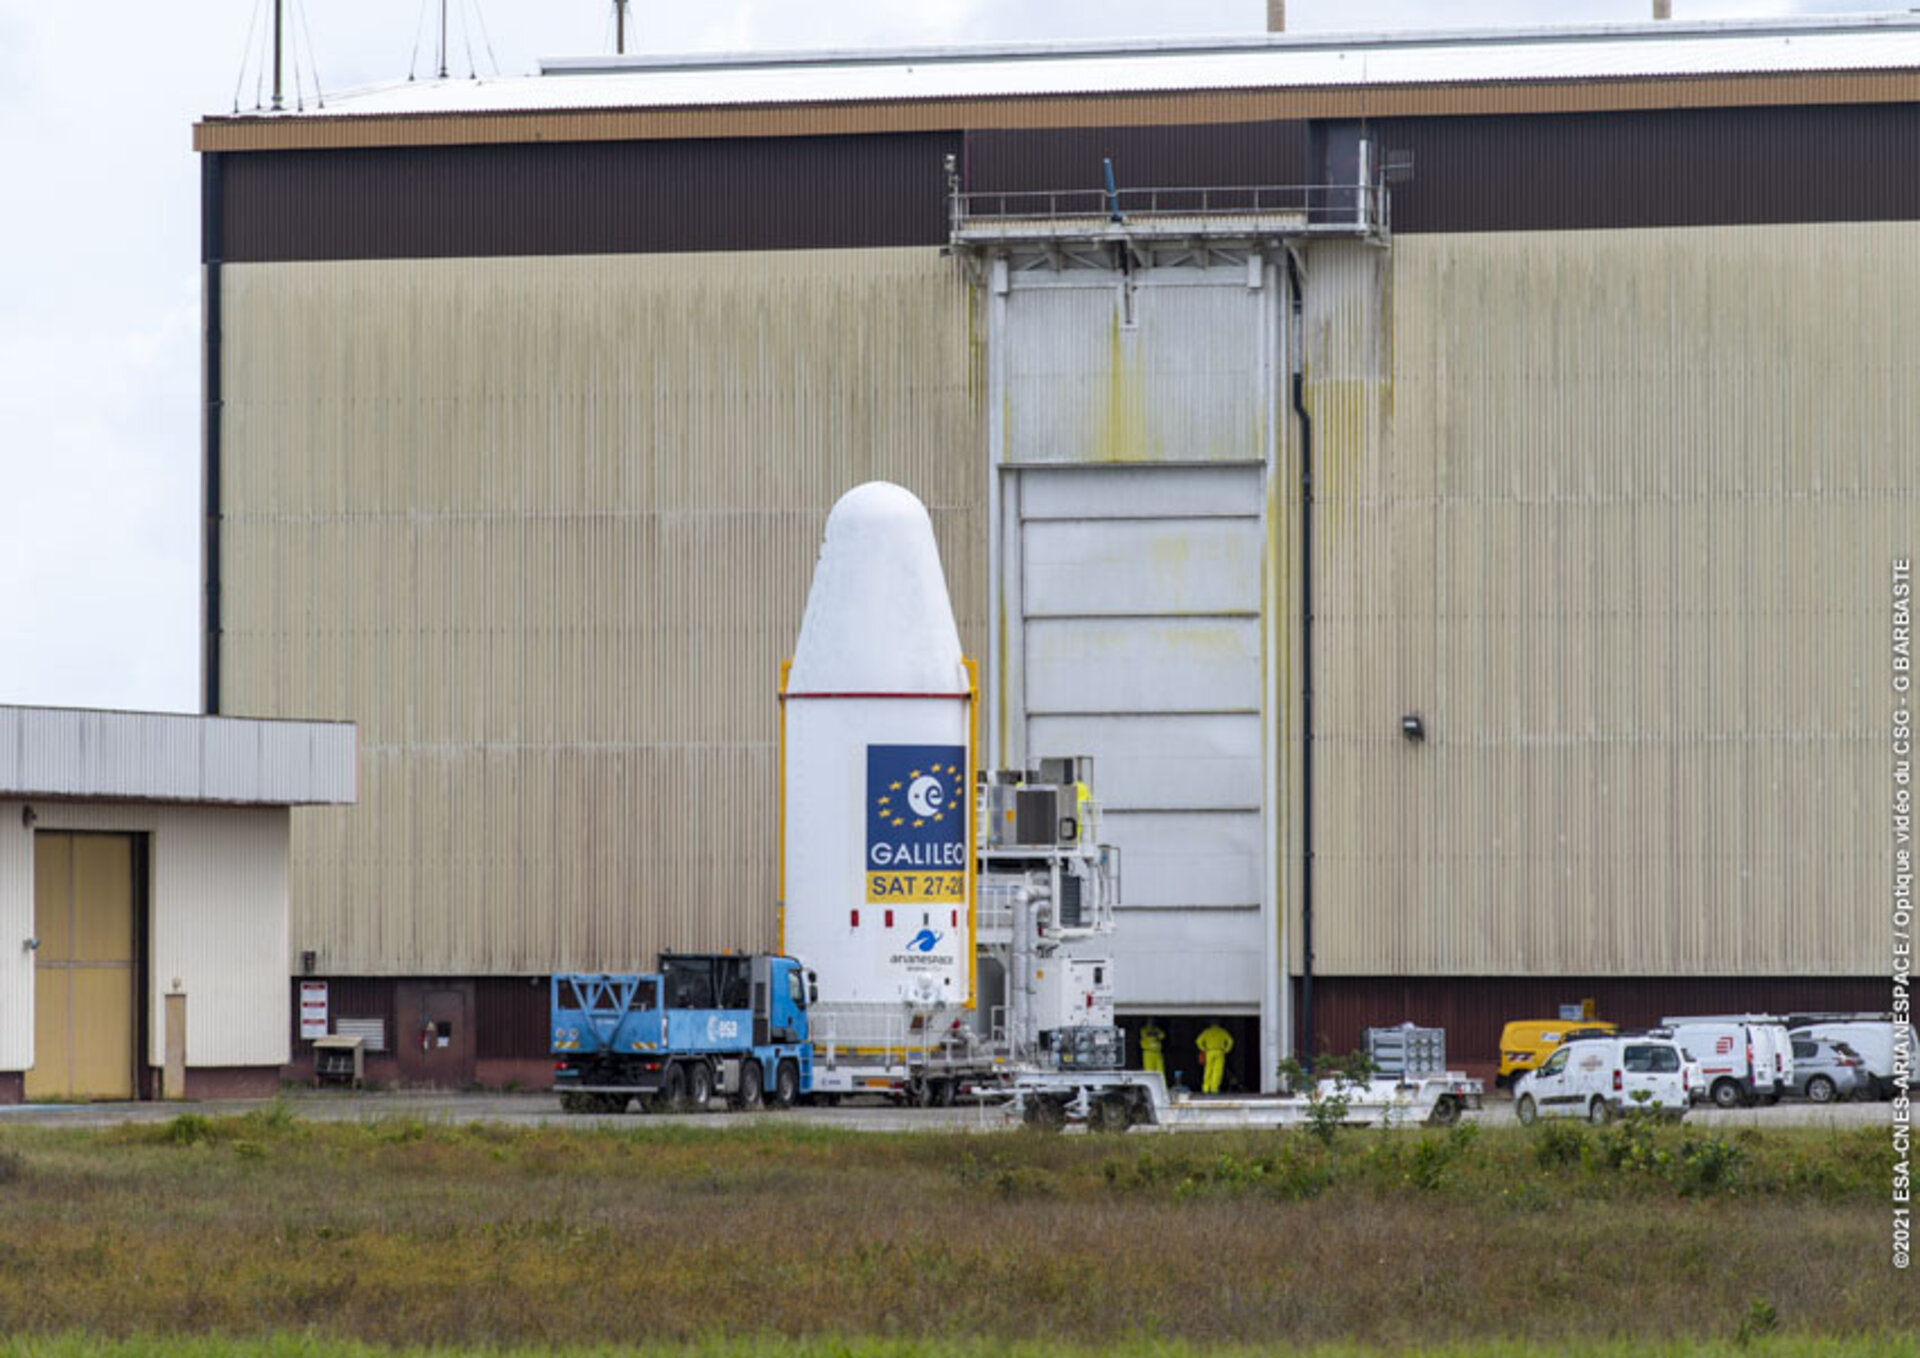 Galileo upper composite transported to launch site